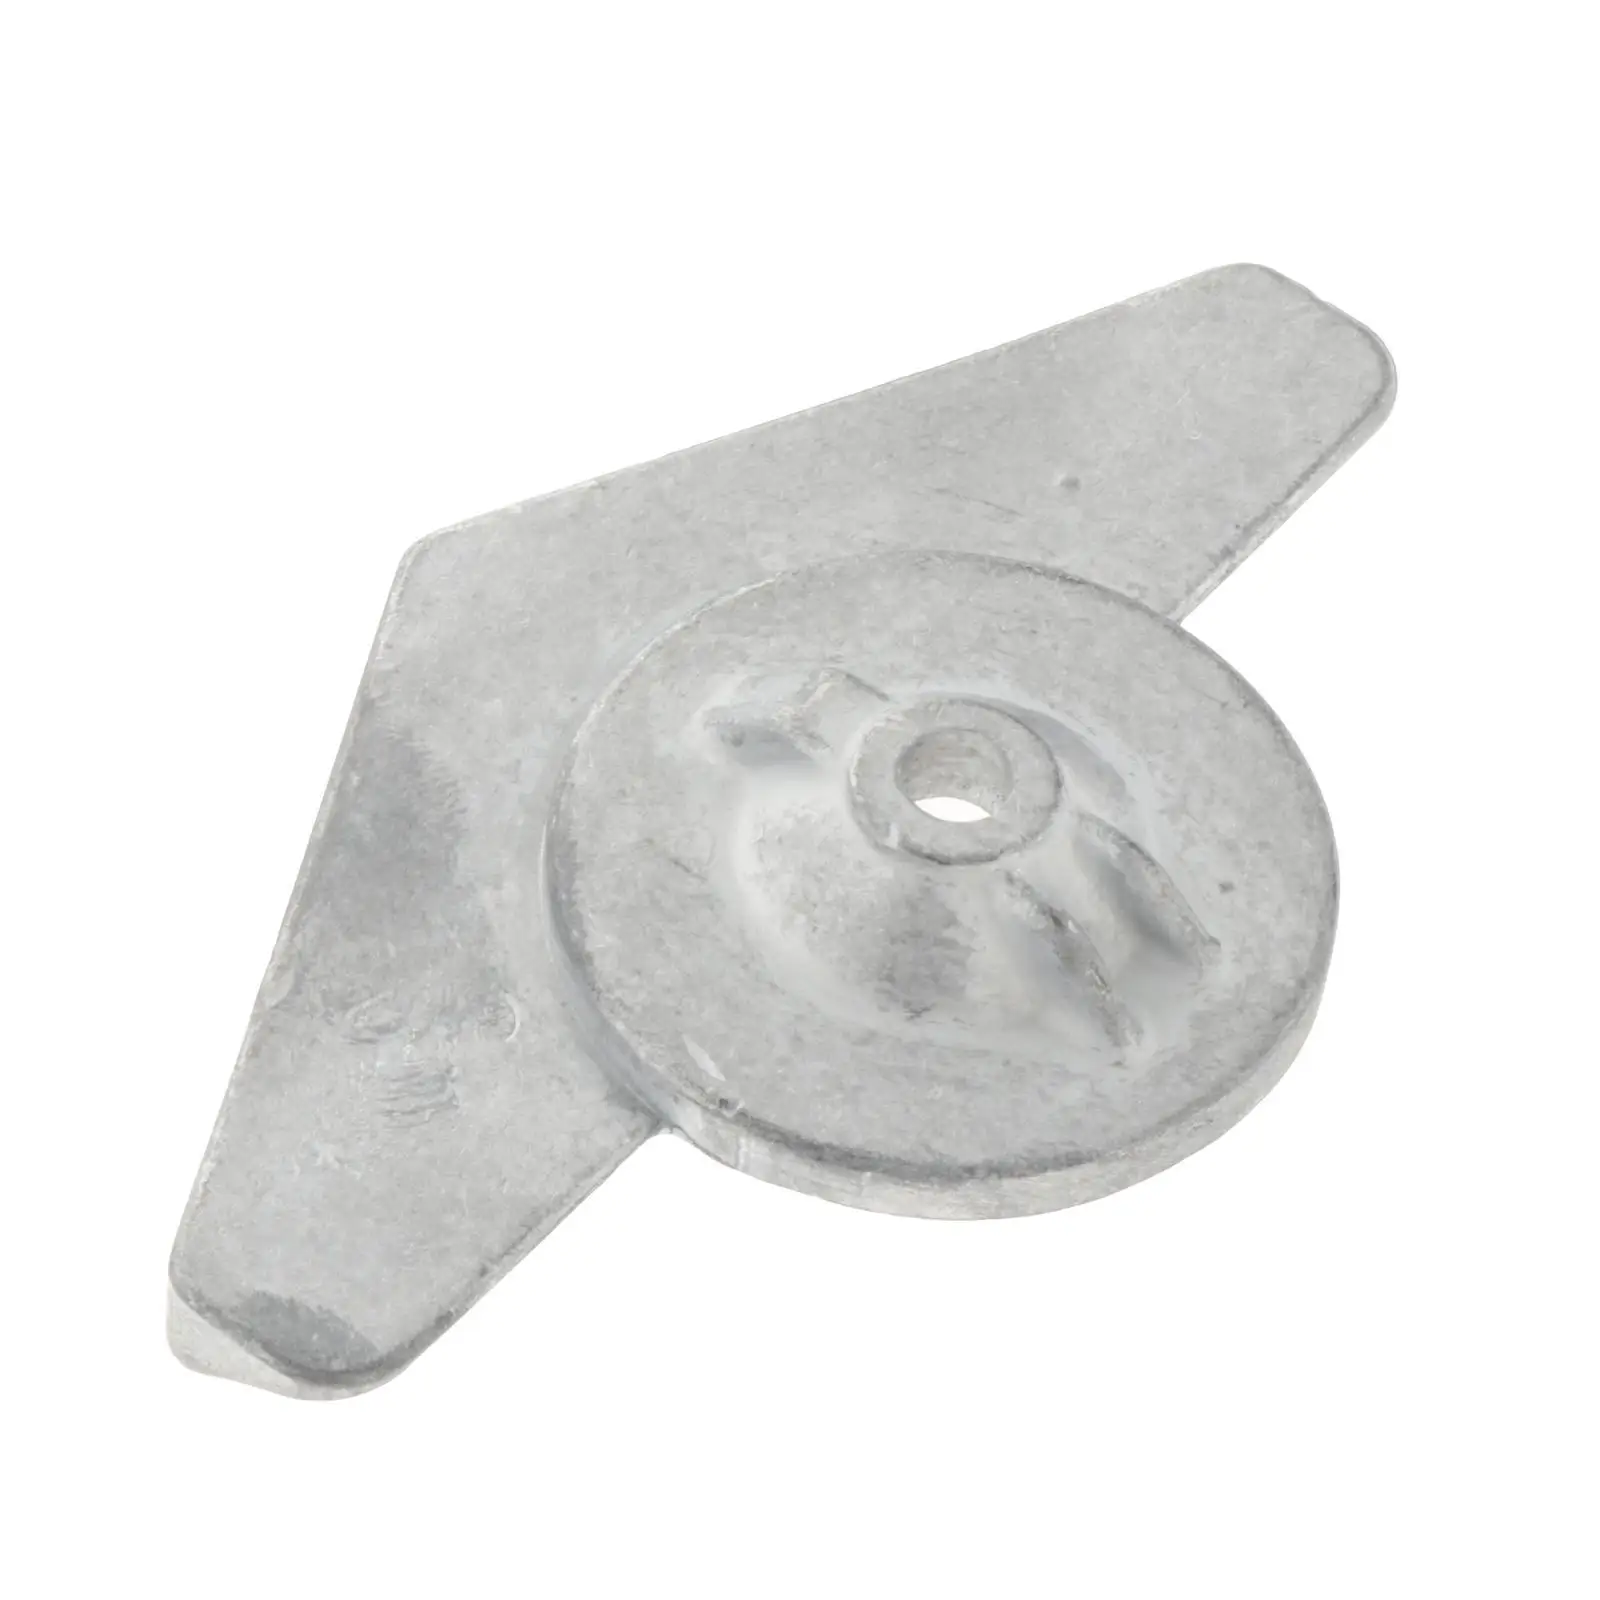 Anode Fits Outboard Motor 5 Stroke & Easy to Install Durable 683-45251-00 Parts